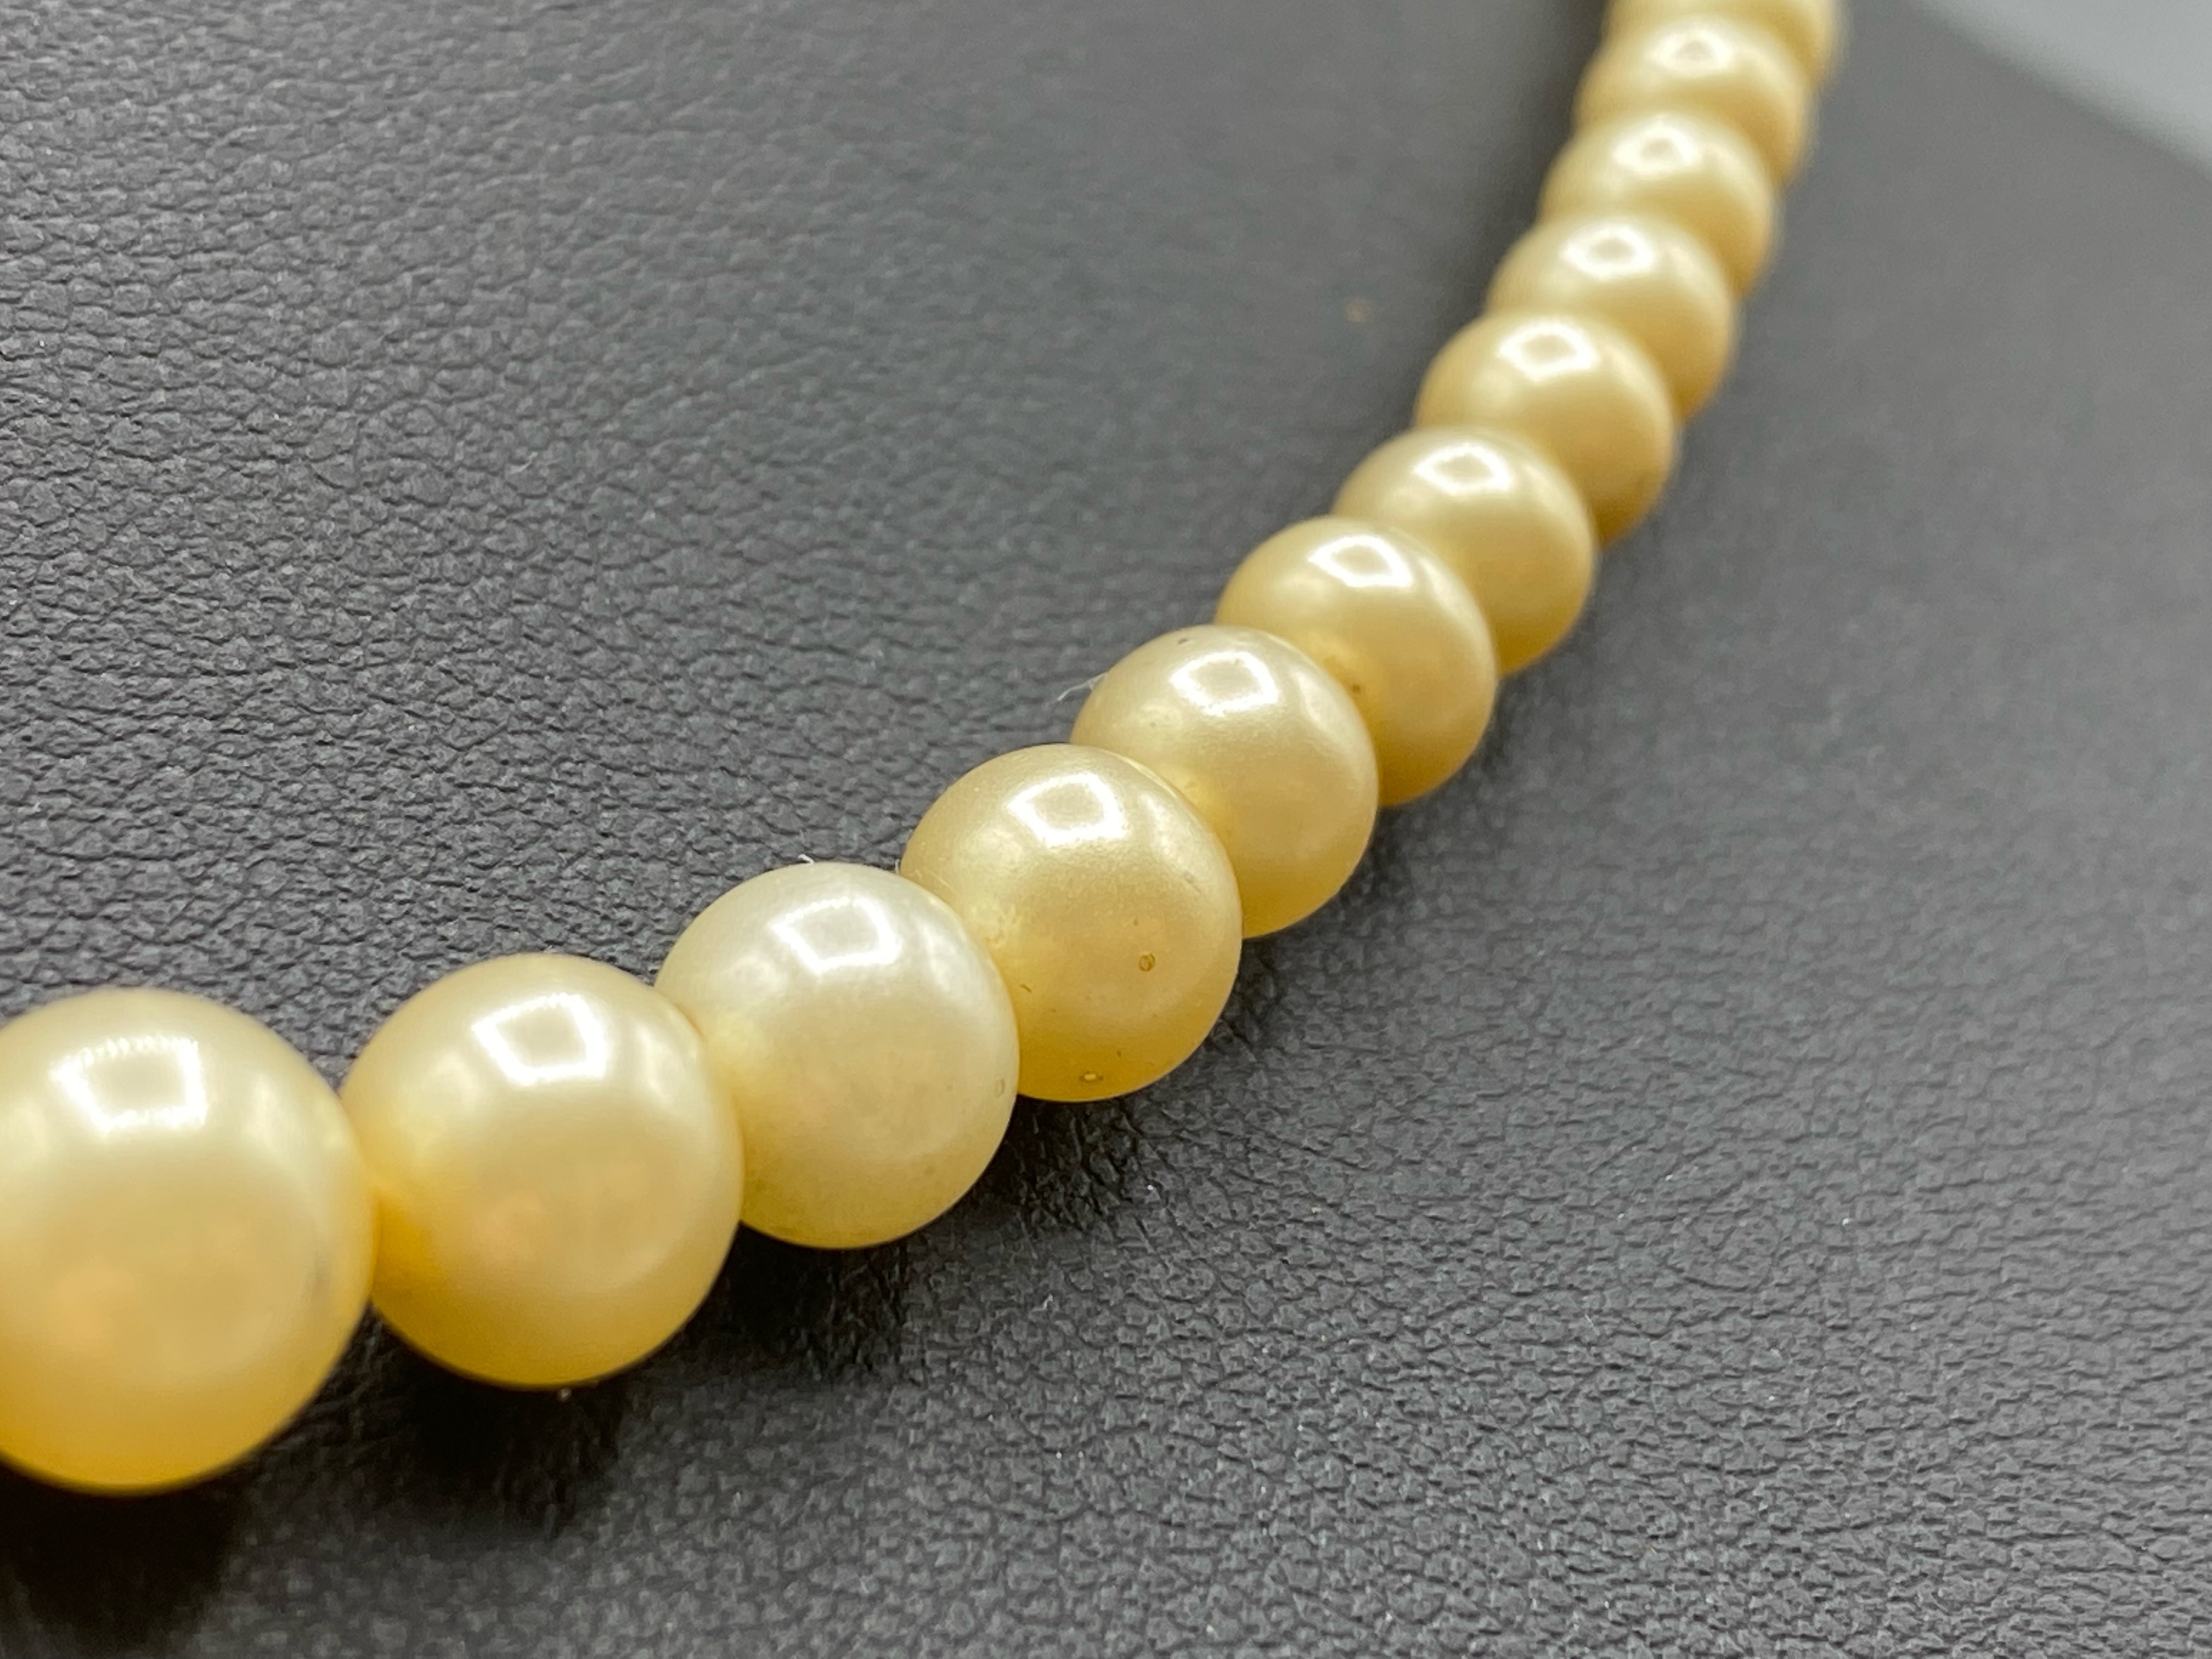 Antique Edwardian Pearl Necklace with 9ct Gold Clasp 63cm in length - Image 2 of 4